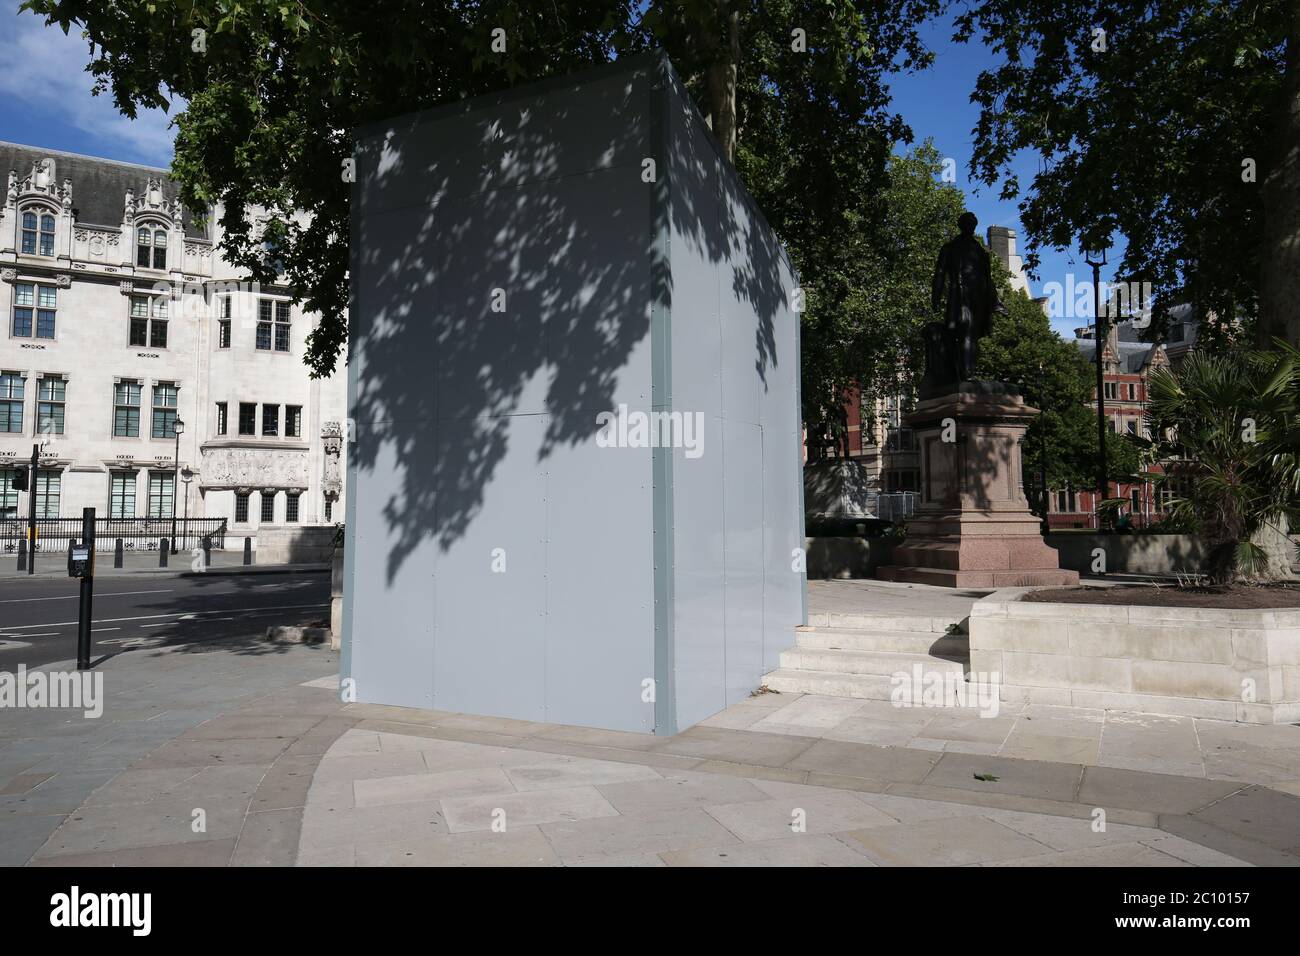 A boarded up Nelson Mandela statue on Parliament Square, London before a possible protest by the Democratic Football Lads Alliance against a Black Lives Matter protest. Stock Photo